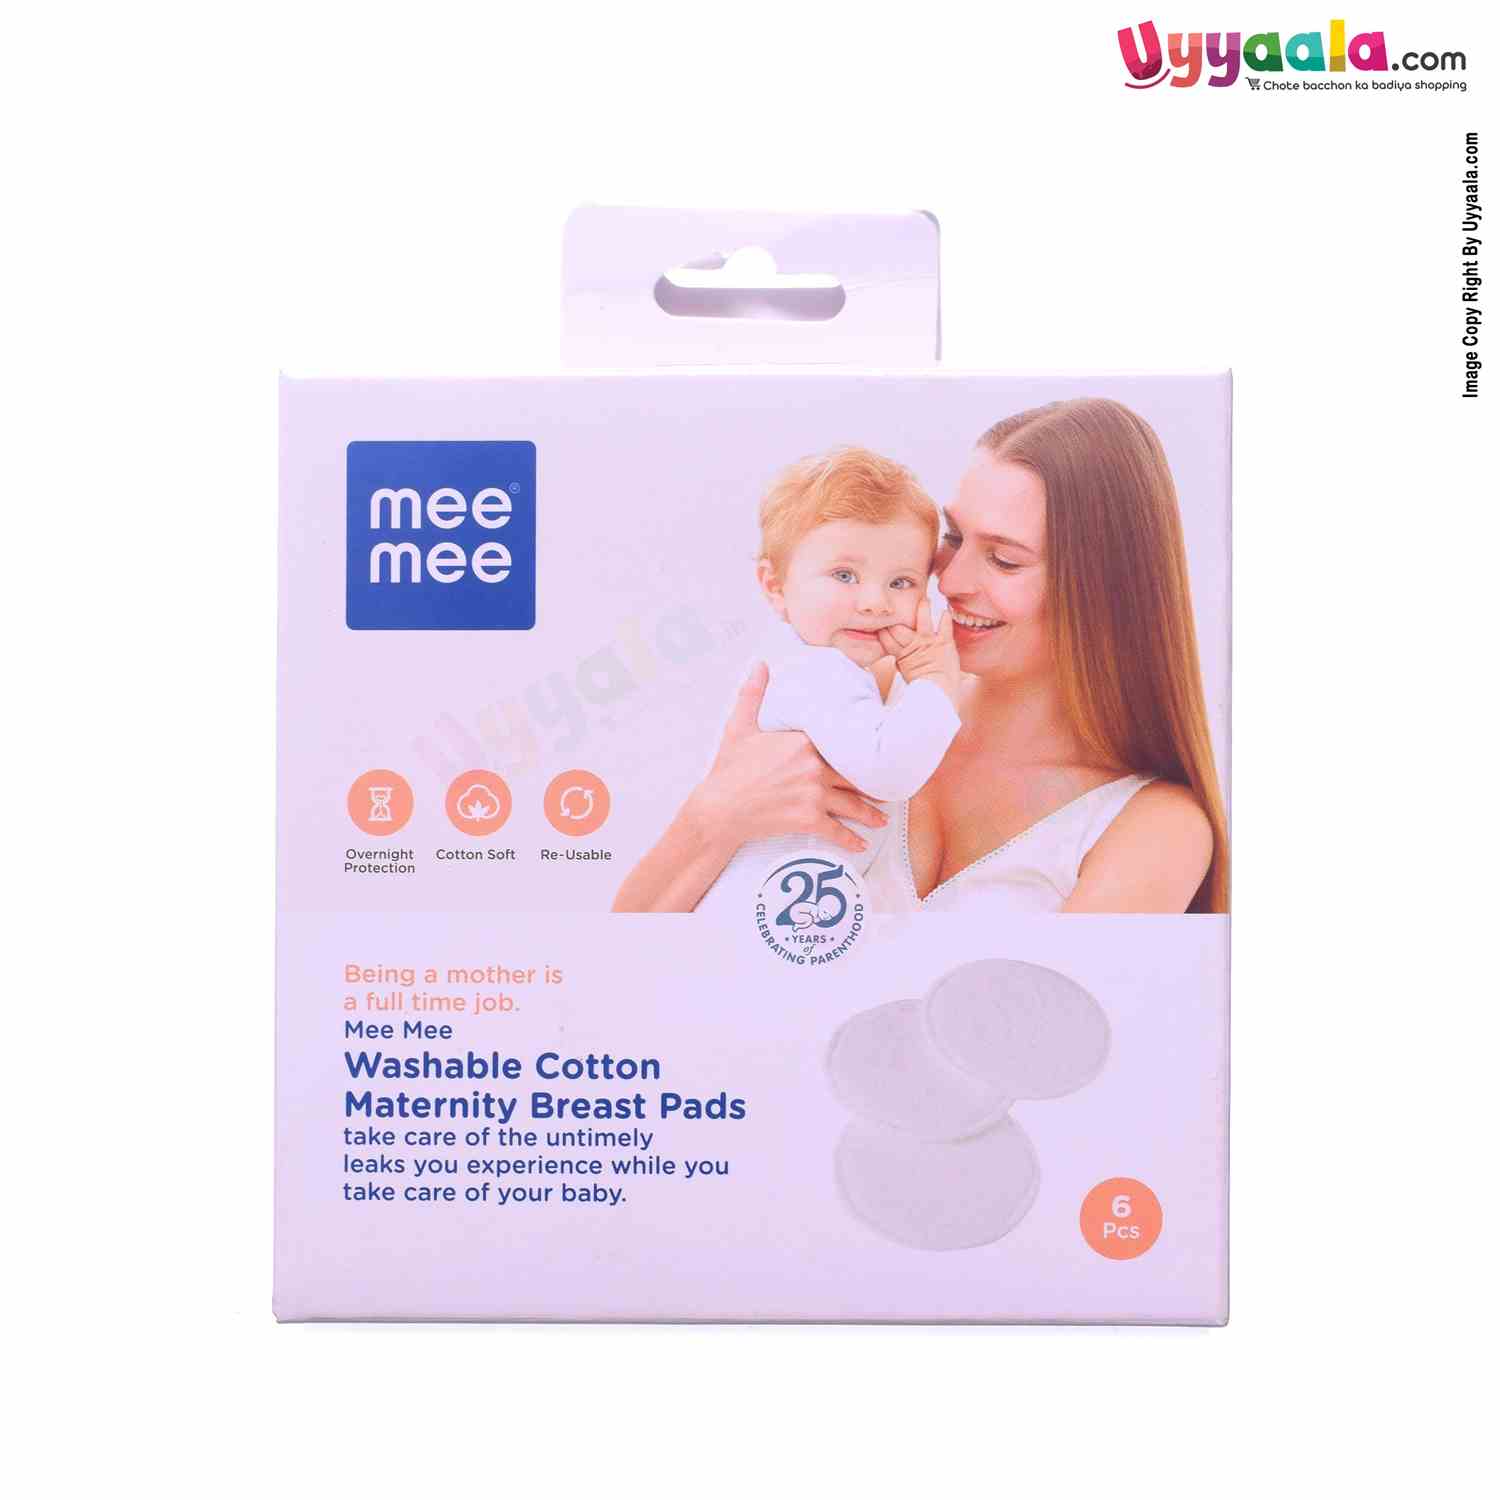 MEE MEE Washable Cotton Maternity Breast Pads - 6pcs